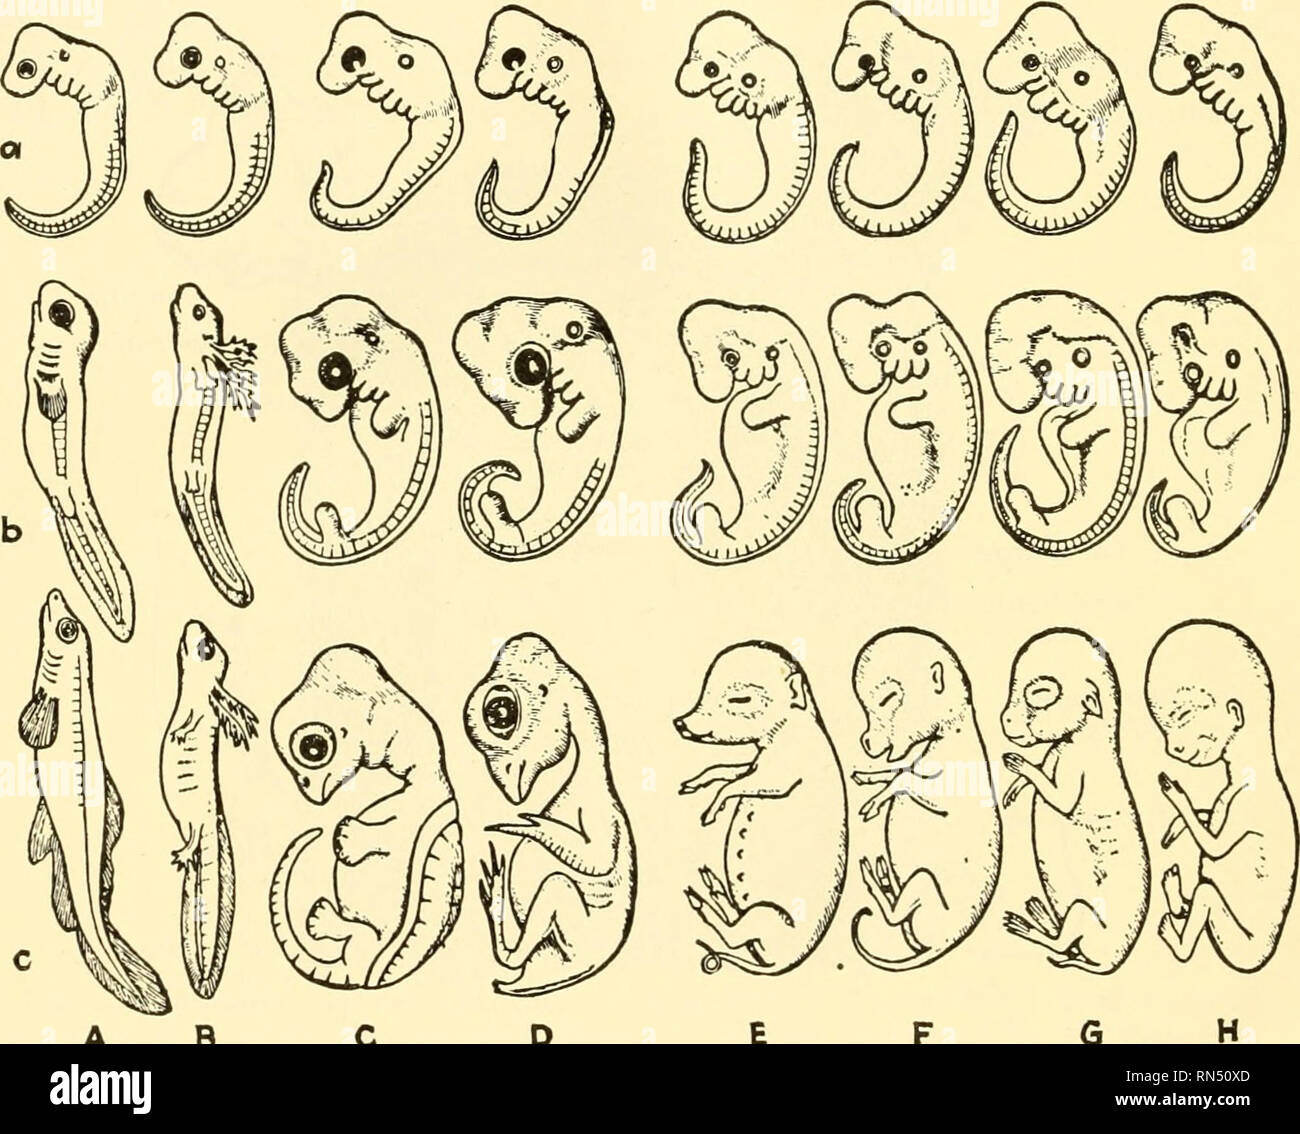 . Animal biology. Zoology; Biology. 520 GENERAL CONSIDERATIONS arches (Fig. 245), the gradual development of the vertebral column to replace the primitive notochord, and the development of the different types of excretory system (Fig. 216), all of which have been previously noted. Paleozoology offers very many evidences that anim.al life has gradually changed. Apparently no rock strata exist which show traces of the. A B C D E F G Fig. 318.—Parallel stages in the development of several vertebrates. A, fish; B, salamander; C, turtle; D, chick; E, pig; F, calf; G, rabbit; H, man. In each series, Stock Photo